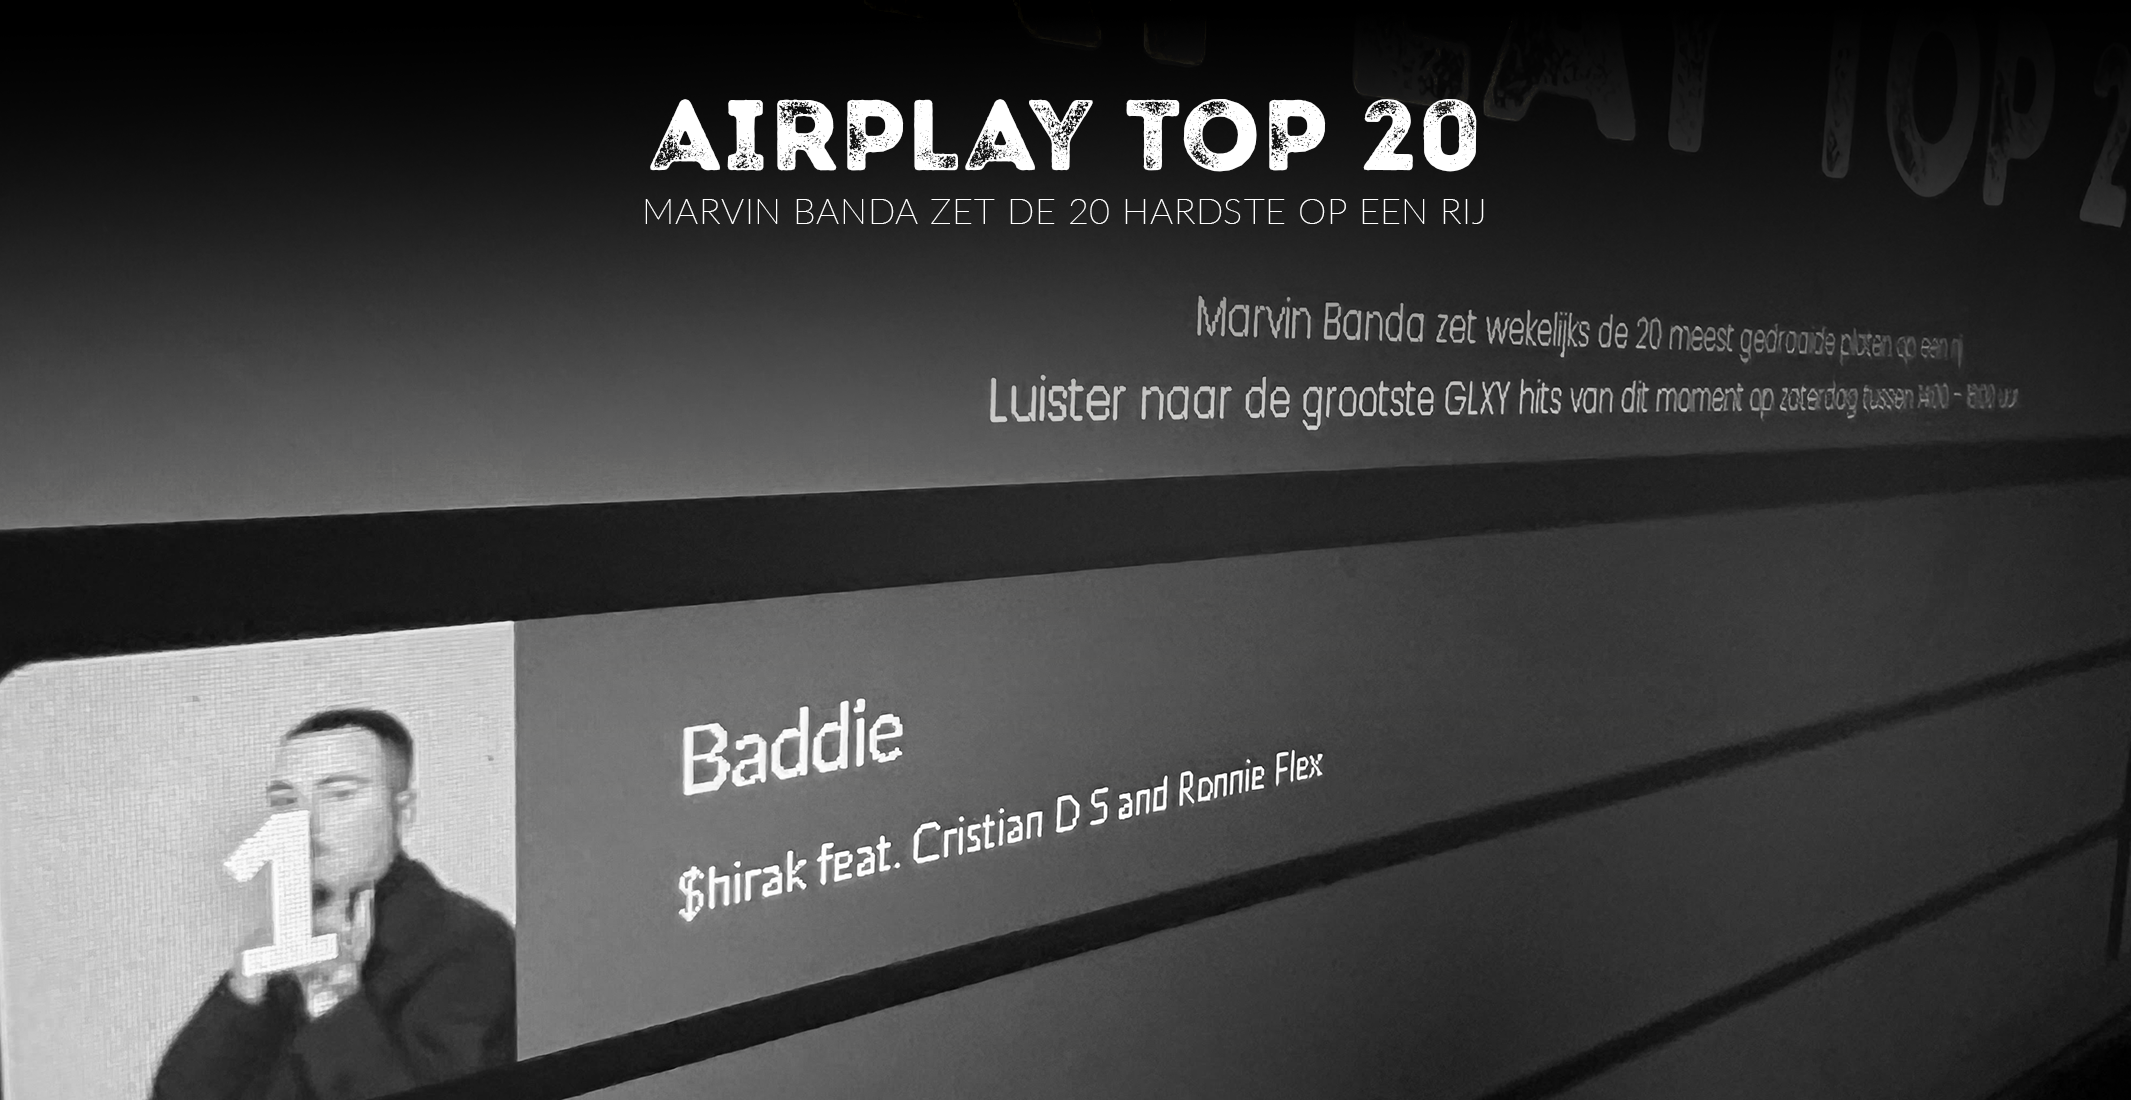 AIRPLAY TOP 20